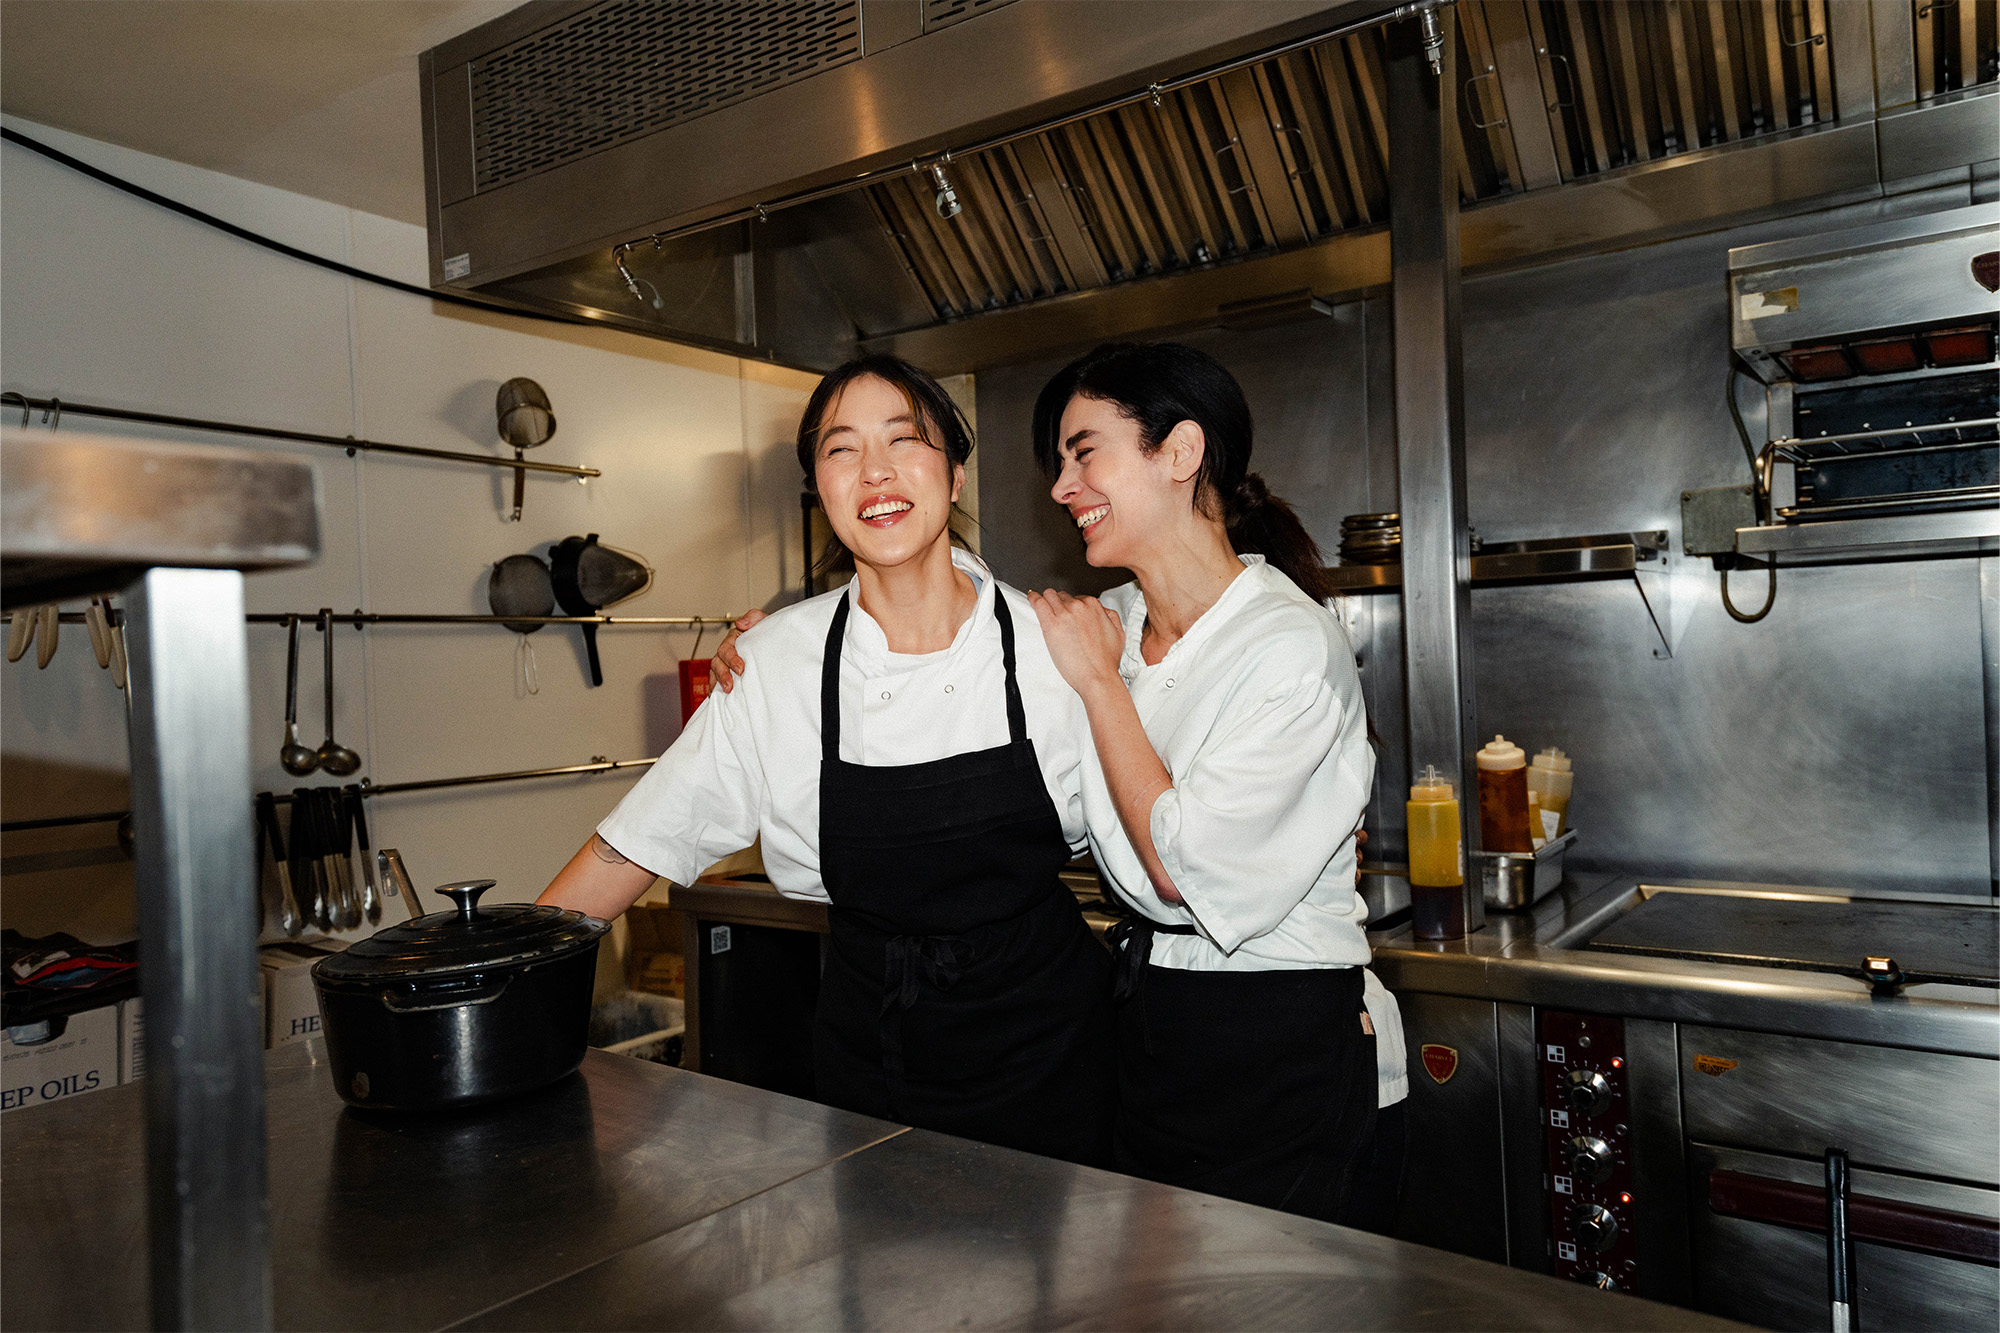 Two female chefs laughing together in the kitchen